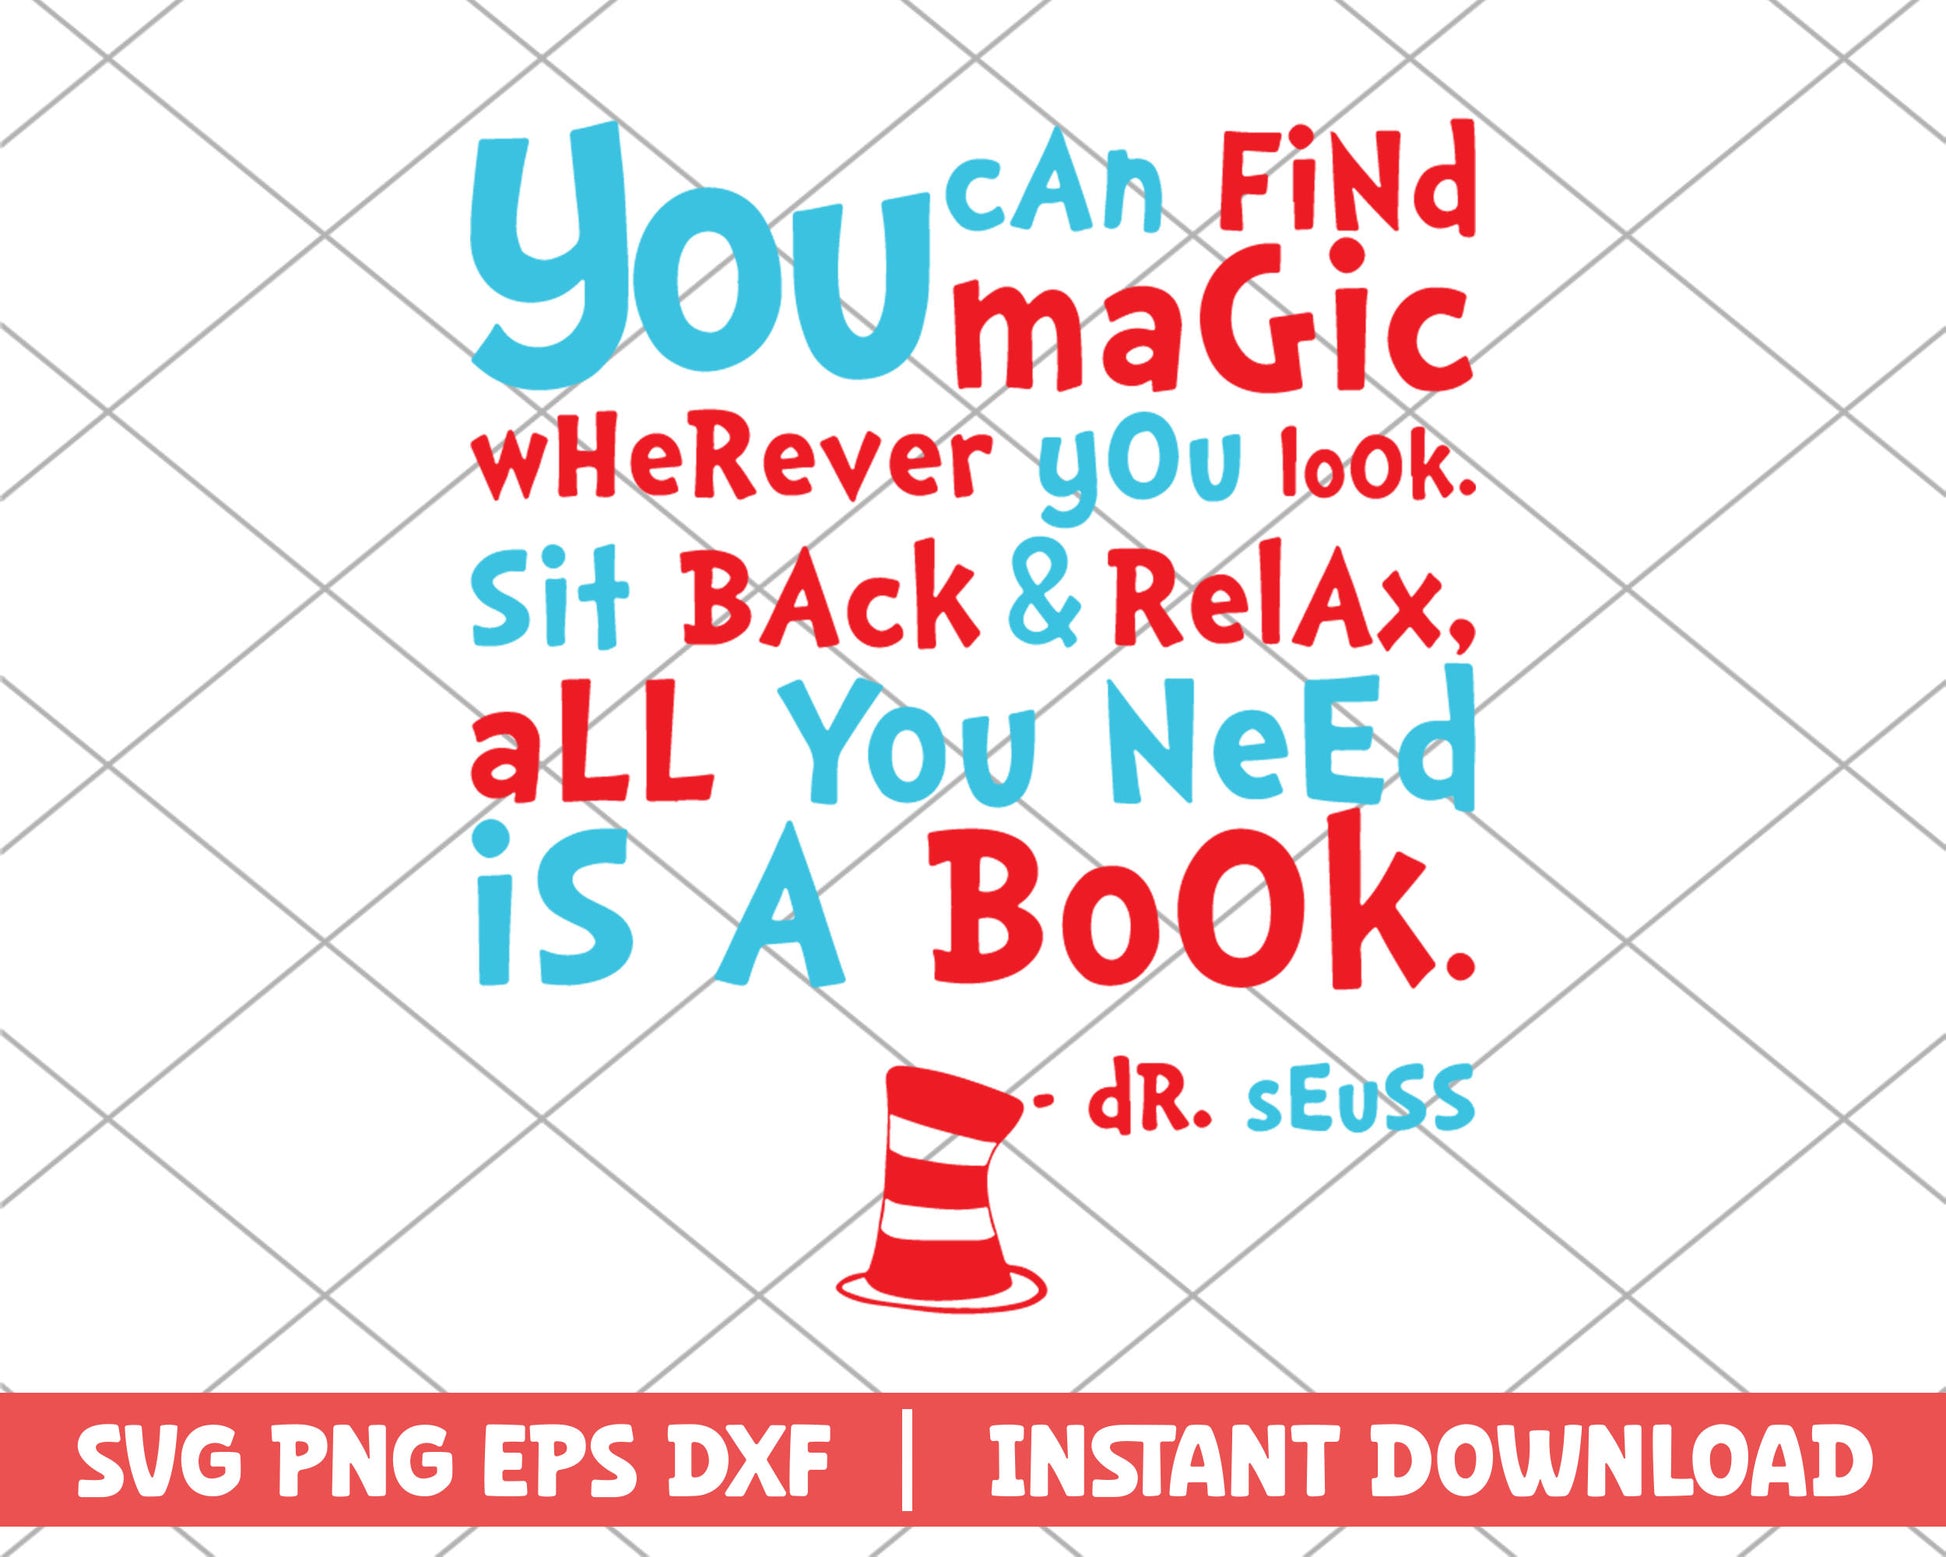 You can find magic dr.seuss svg 